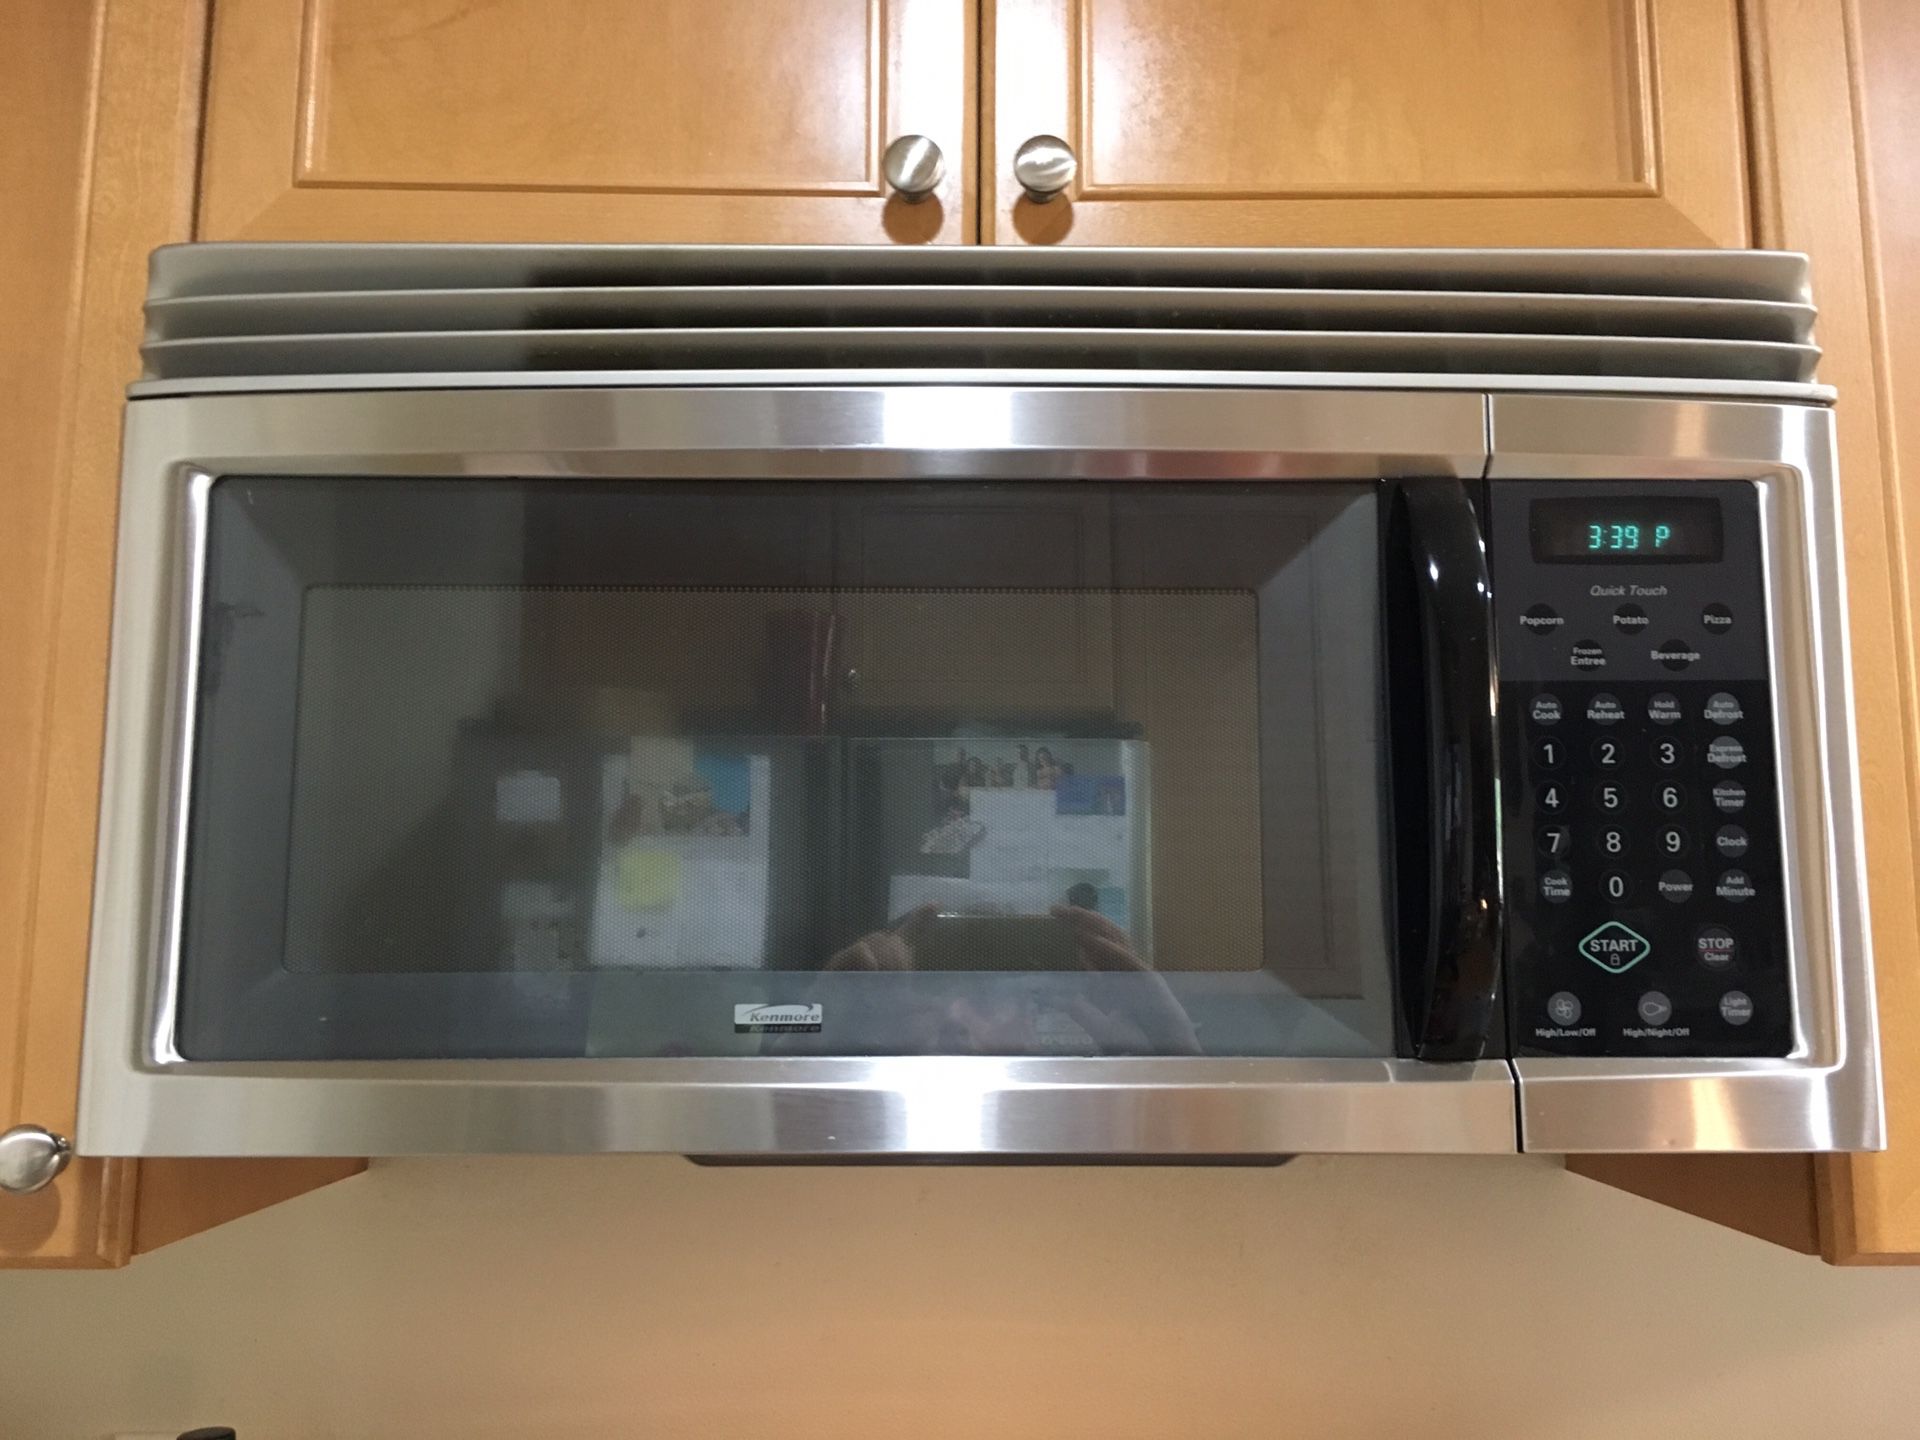 😃 Kenmore Microwave 30” stainless steel 1000 watts above-the-range built-in